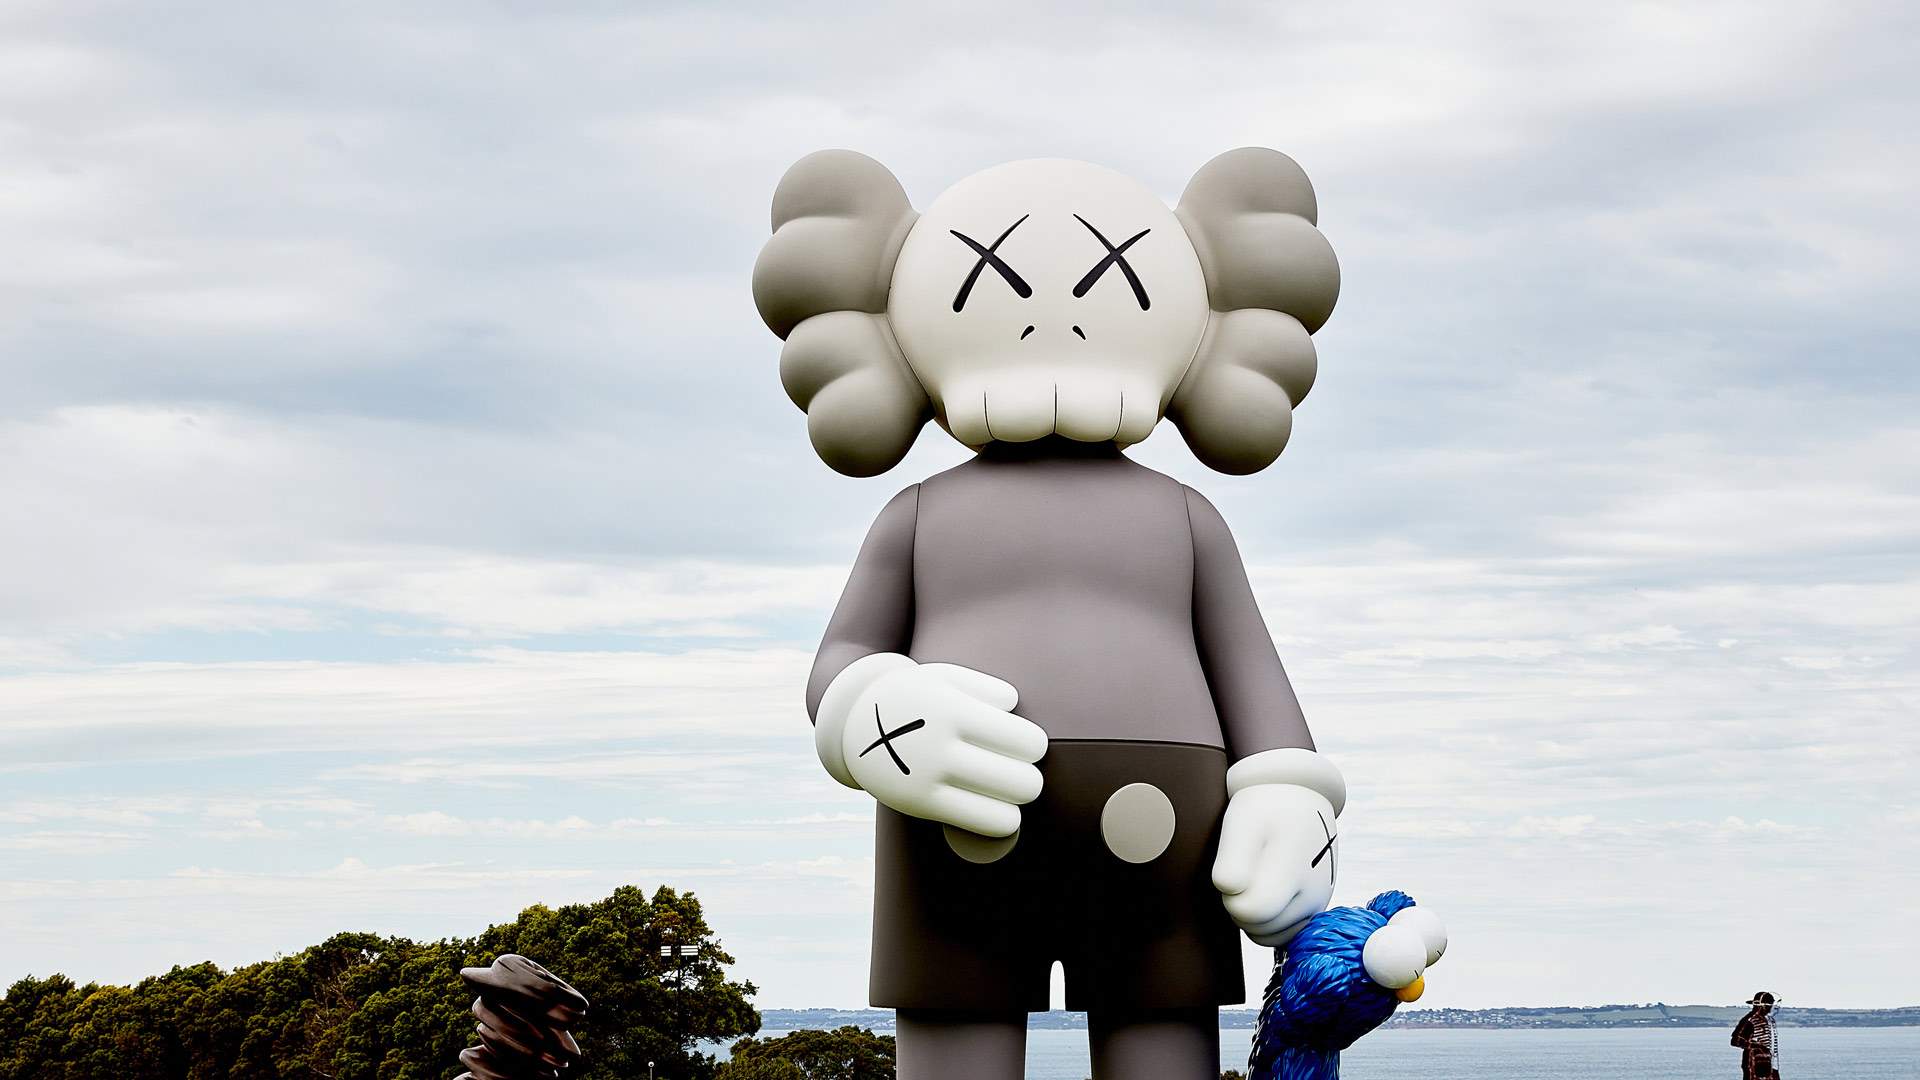 A Towering KAWS Work Is the Latest Addition to Pt Leo Estate's Famed Sculpture Park